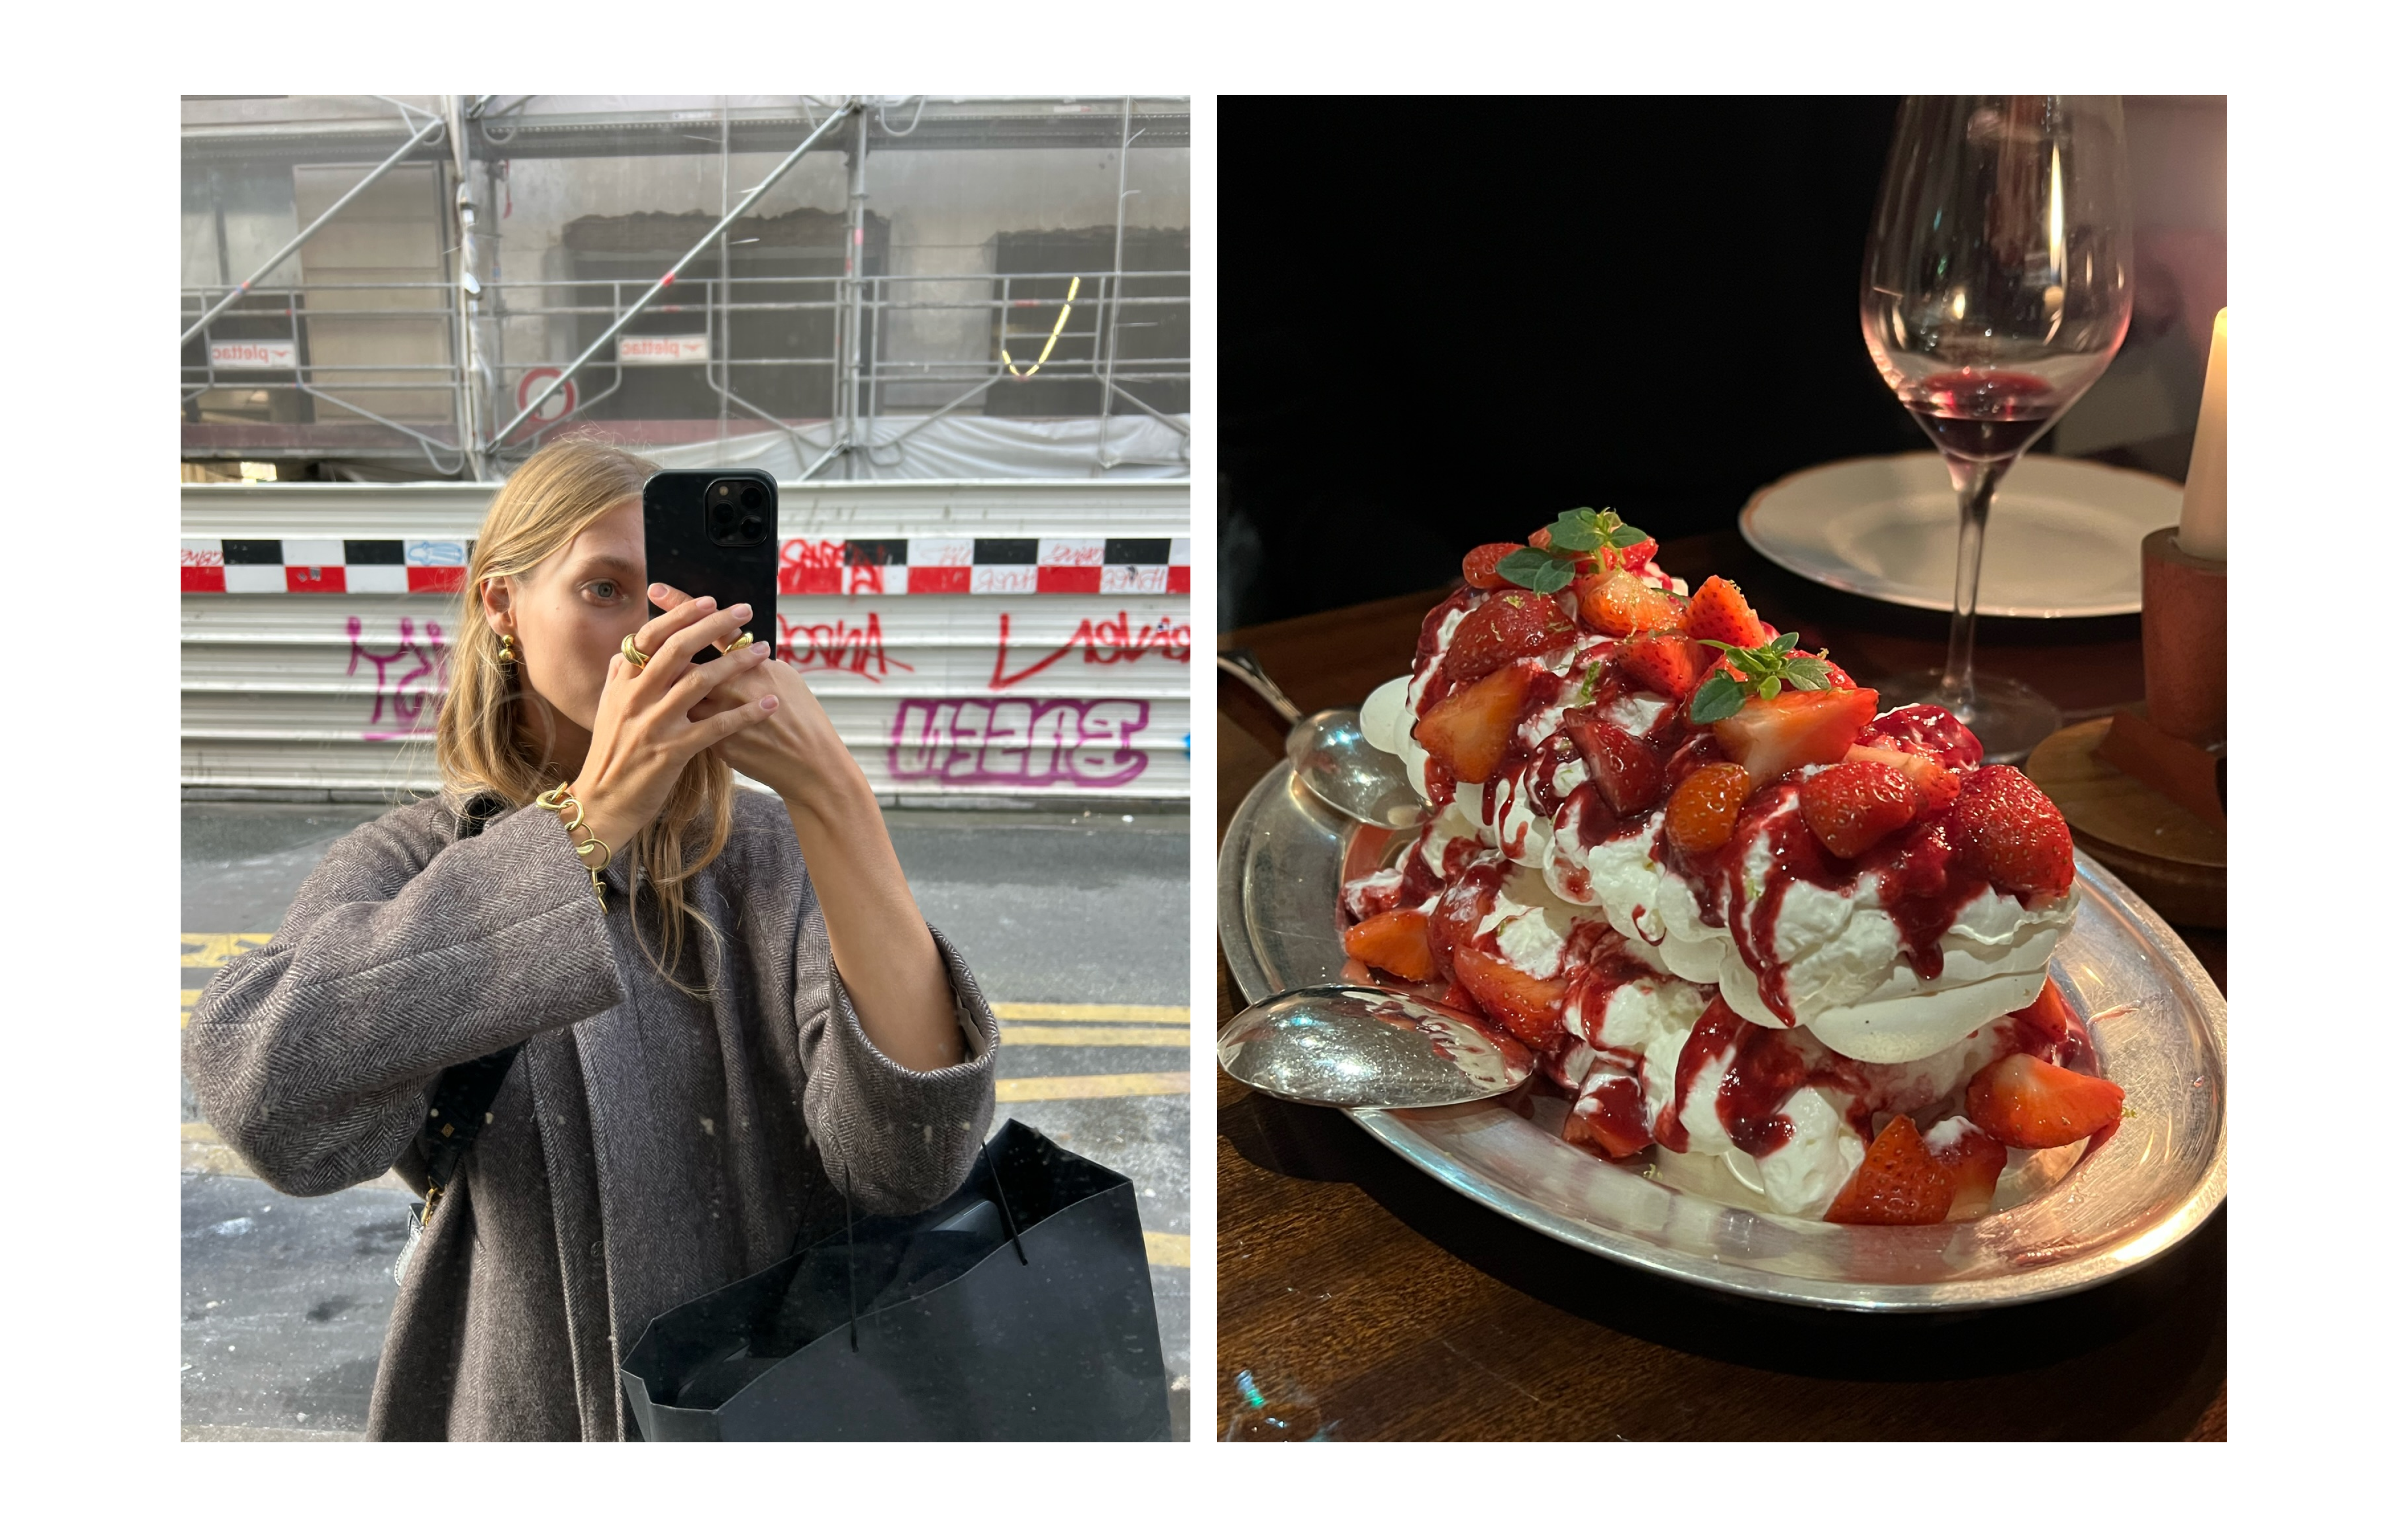 Cecilie wearing LIÉ pieces out and about in Paris. Also, always love ending a dinner with pavlova - this beauty was served at Château Voltaire